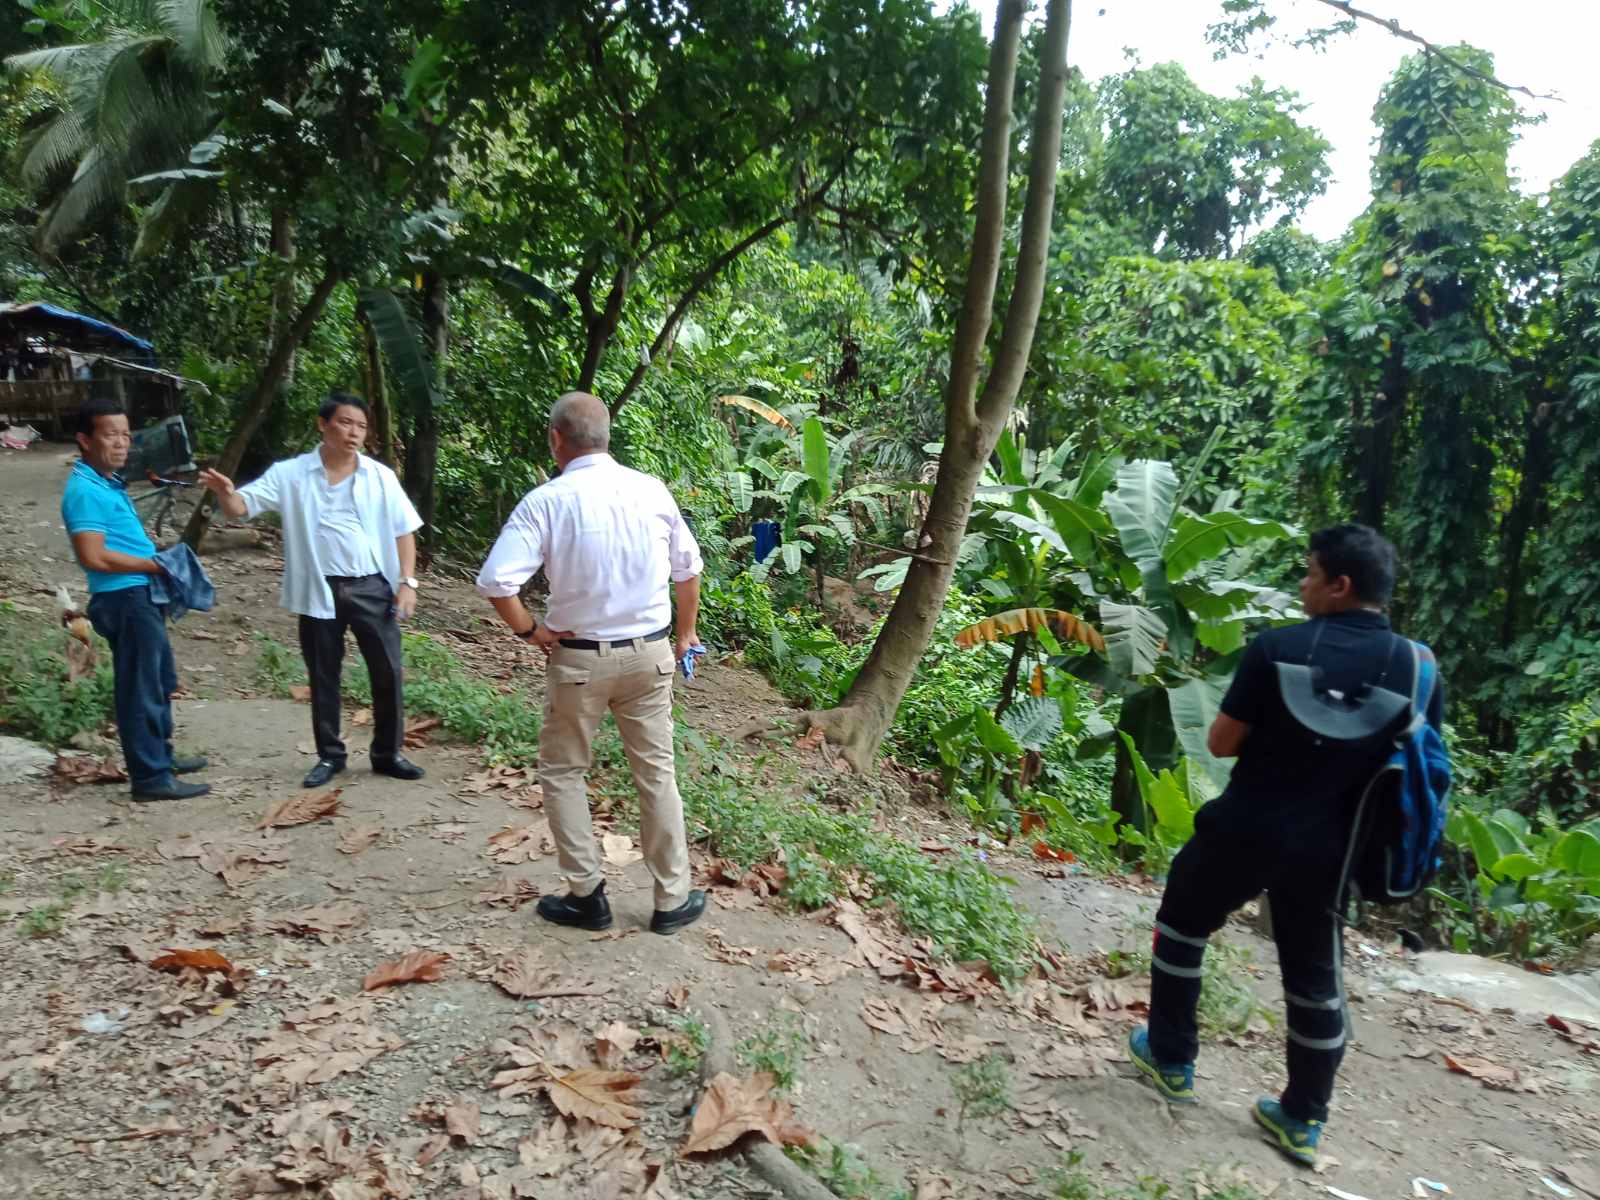 Landslide assessment at Brgy. Maa, conducted by the Davao City DRRMO, DENR-MGB and City Engineers Office (CEO), November 6, 2019.